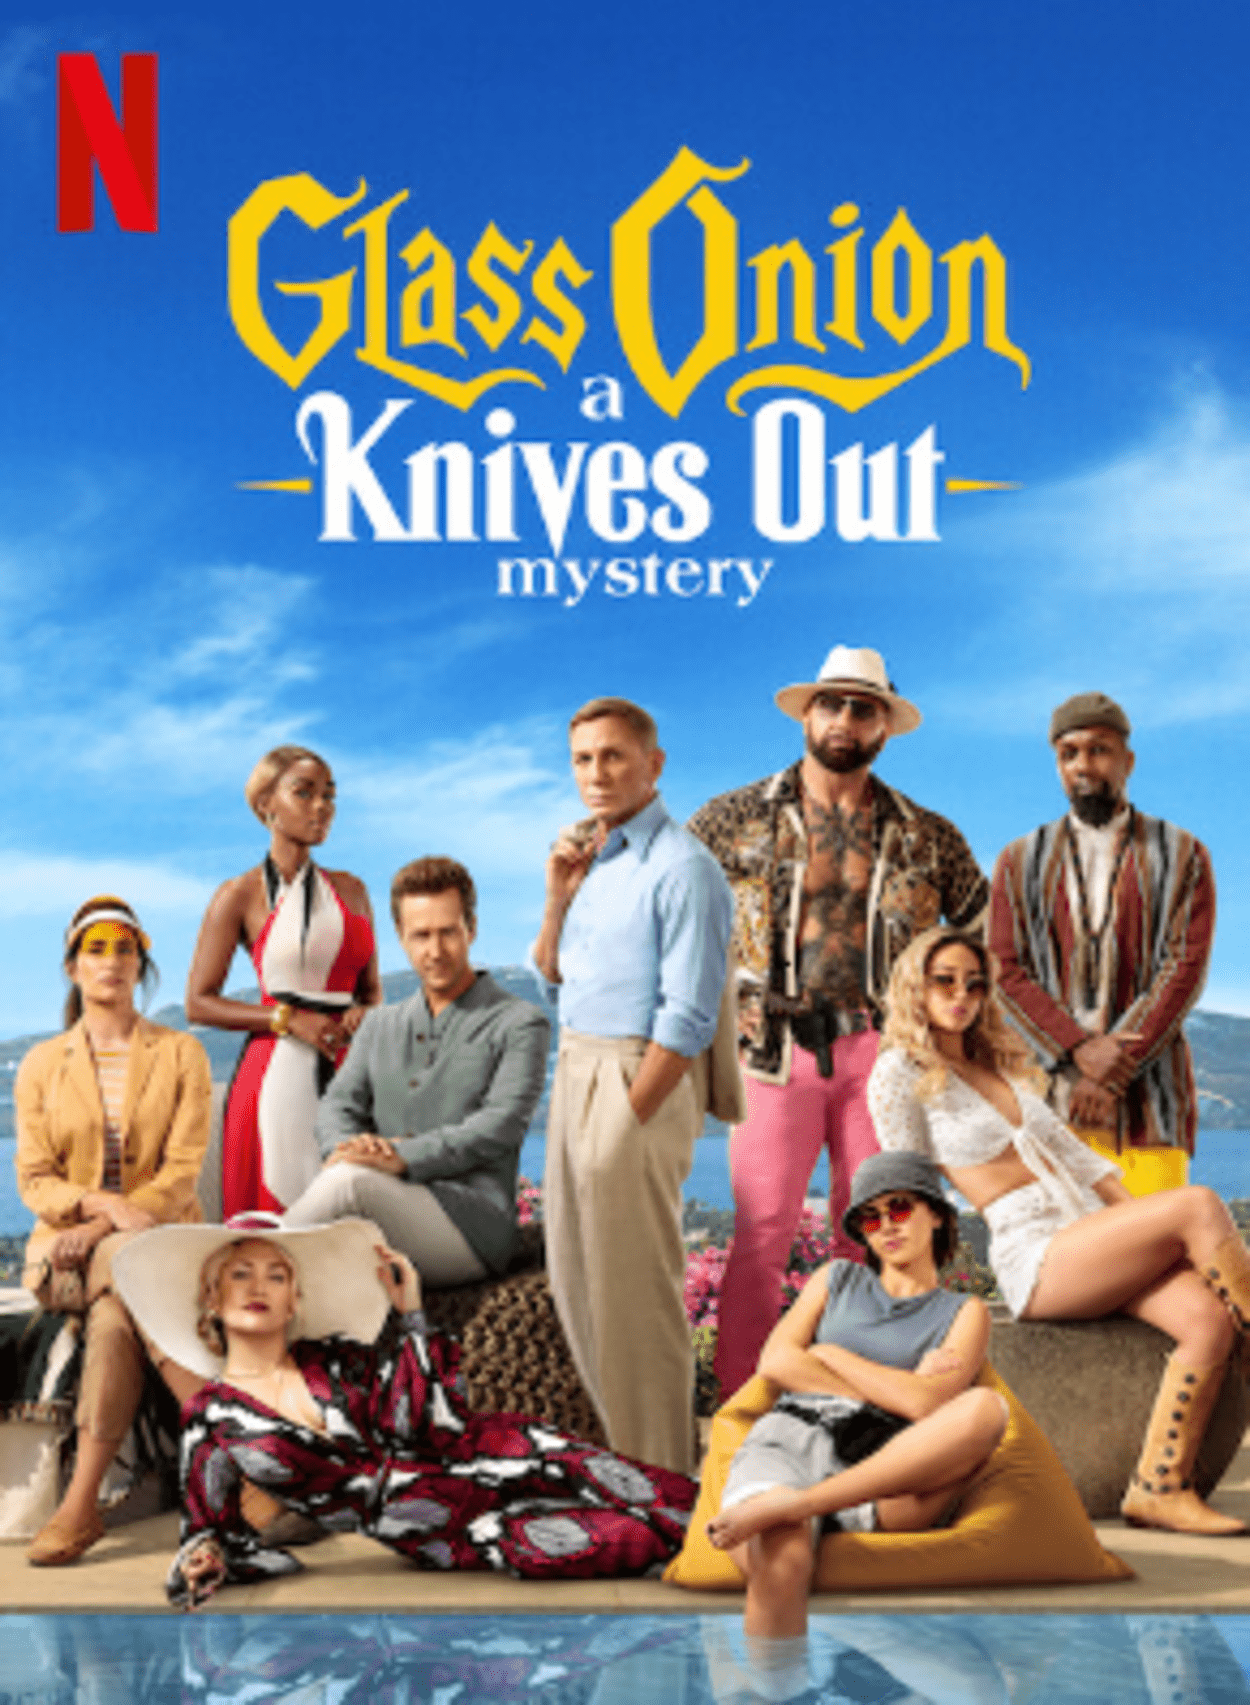 Where Was Glass Onion: A Knives Out Mystery’ Filmed?